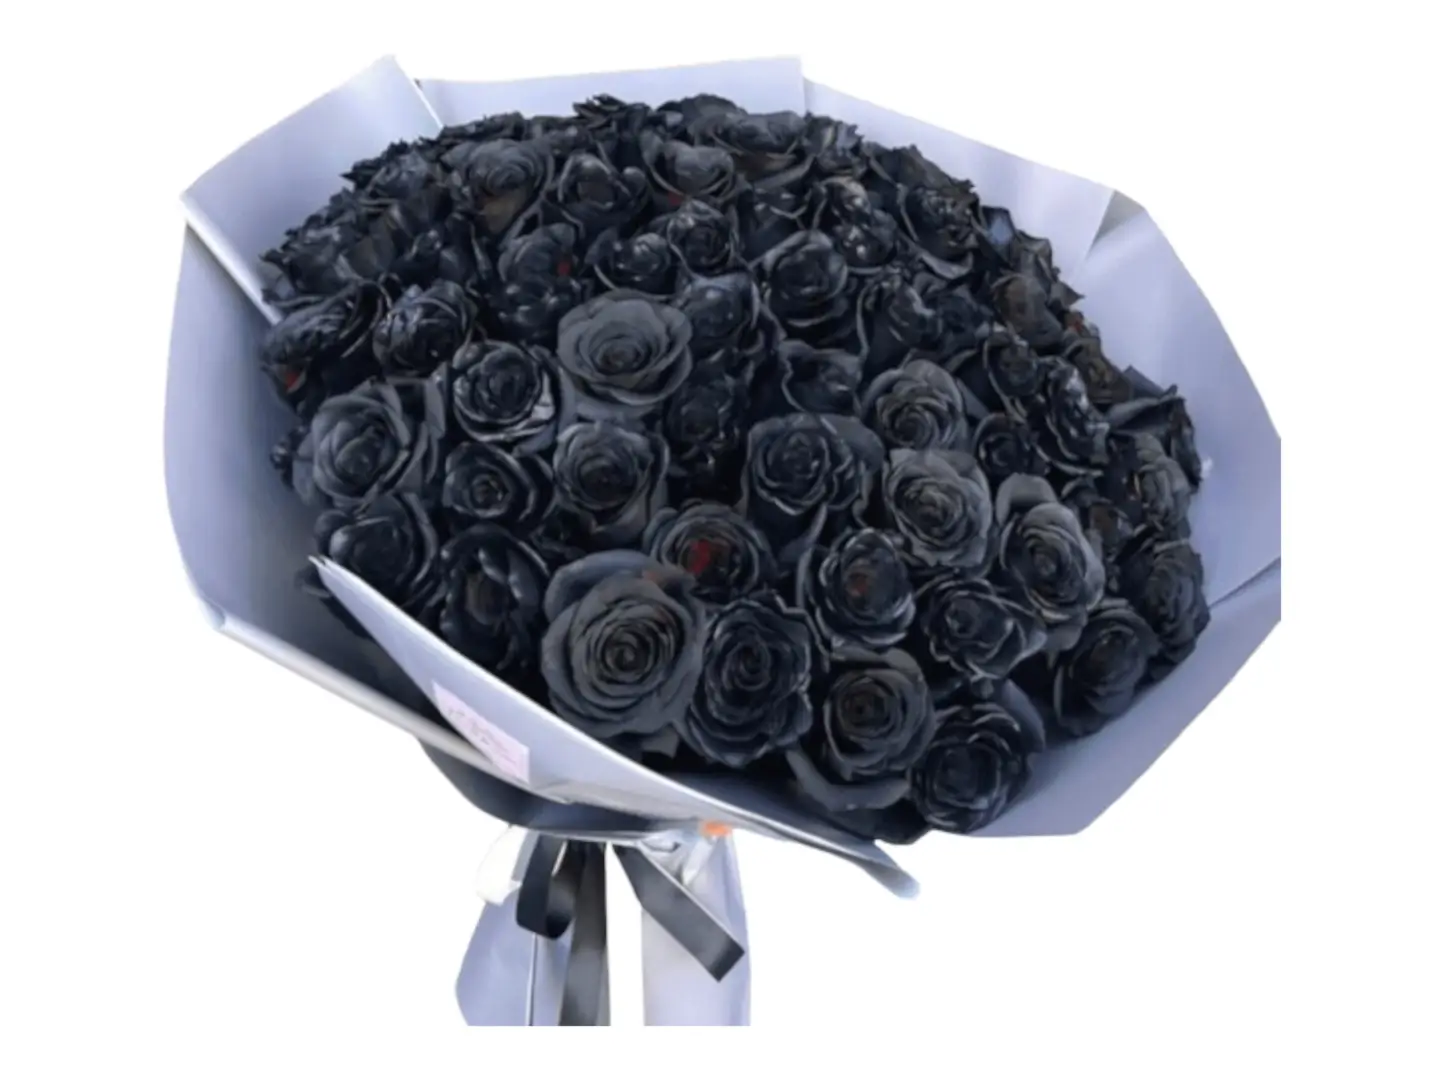 50 black Roses bouquets wrapped up